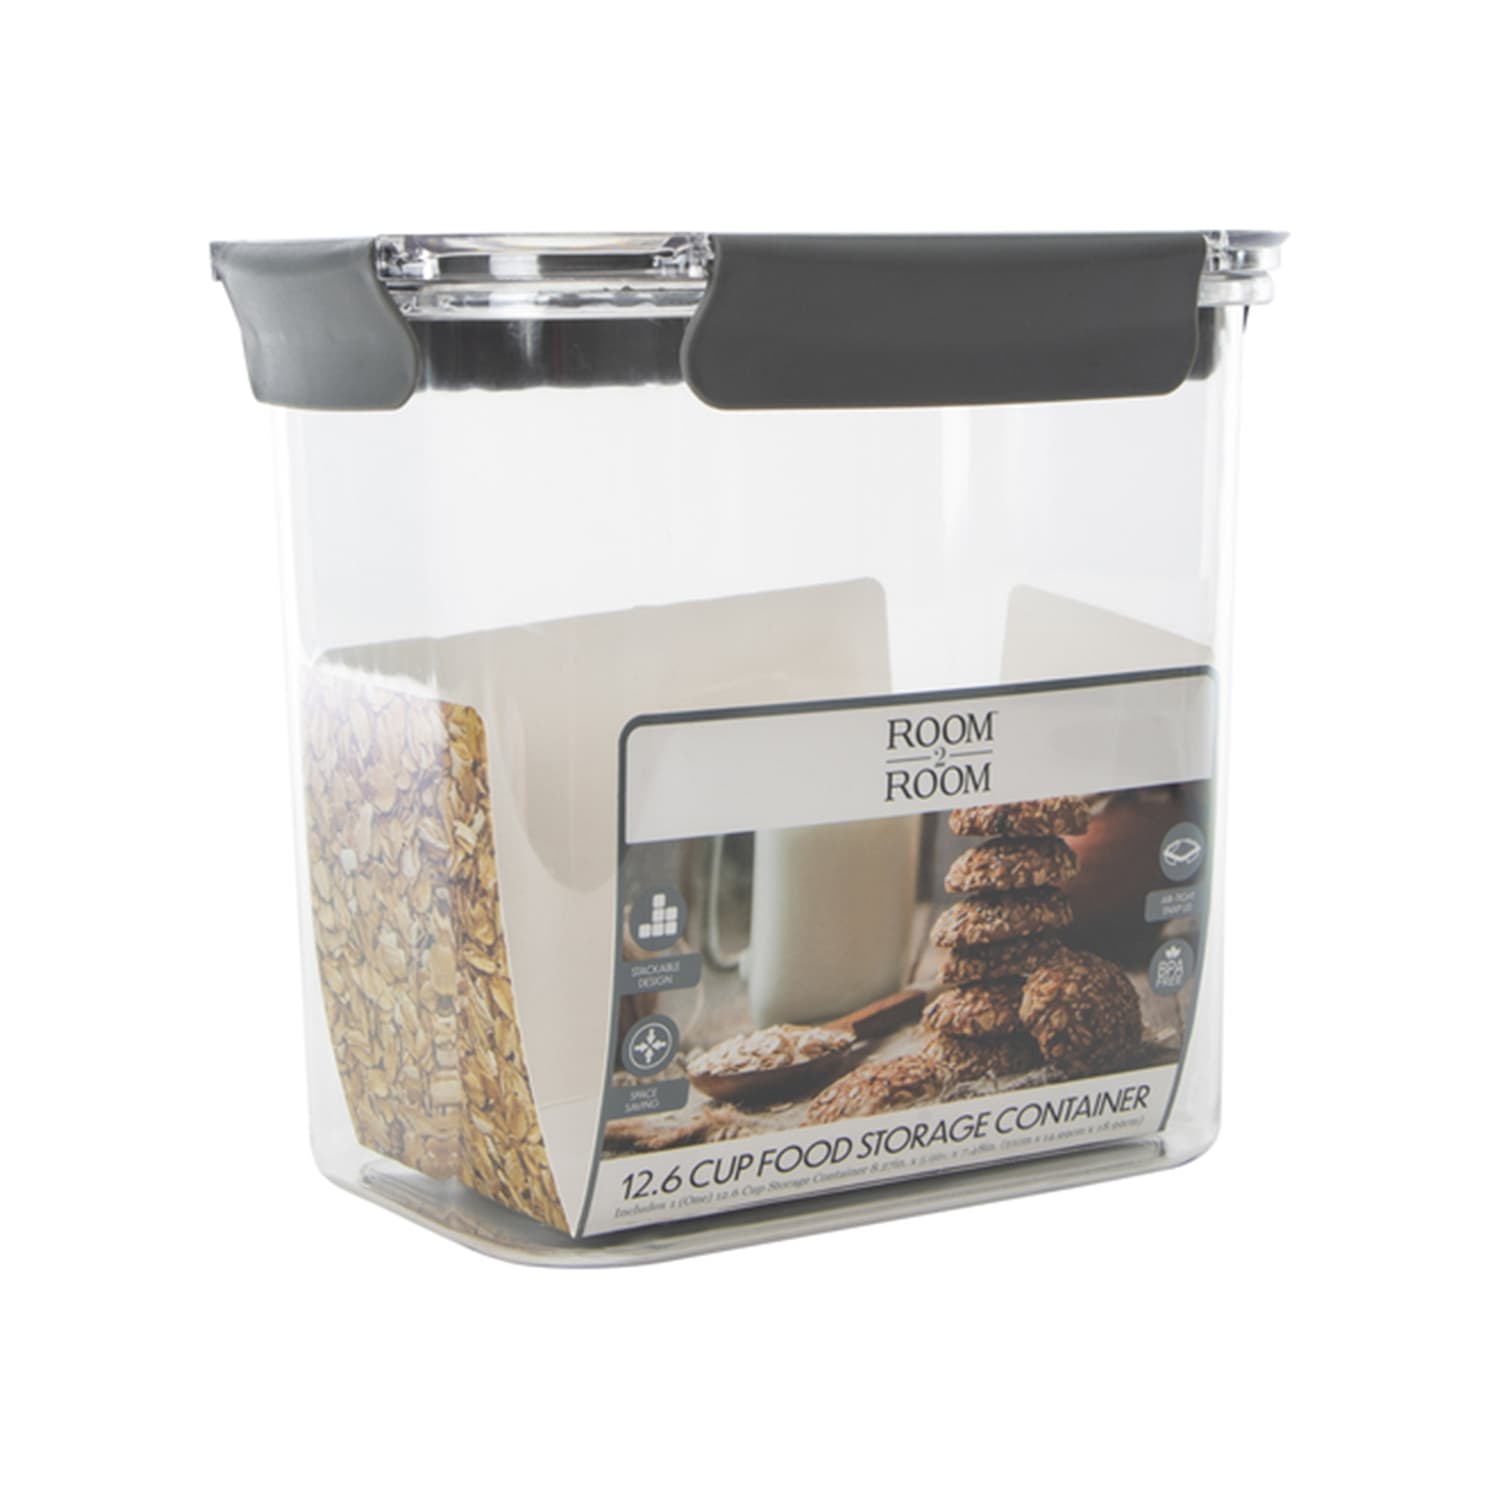 http://cdn.apartmenttherapy.info/image/upload/v1685726904/k/Edit/kitchn-products/five-below-food-storage-container.jpg